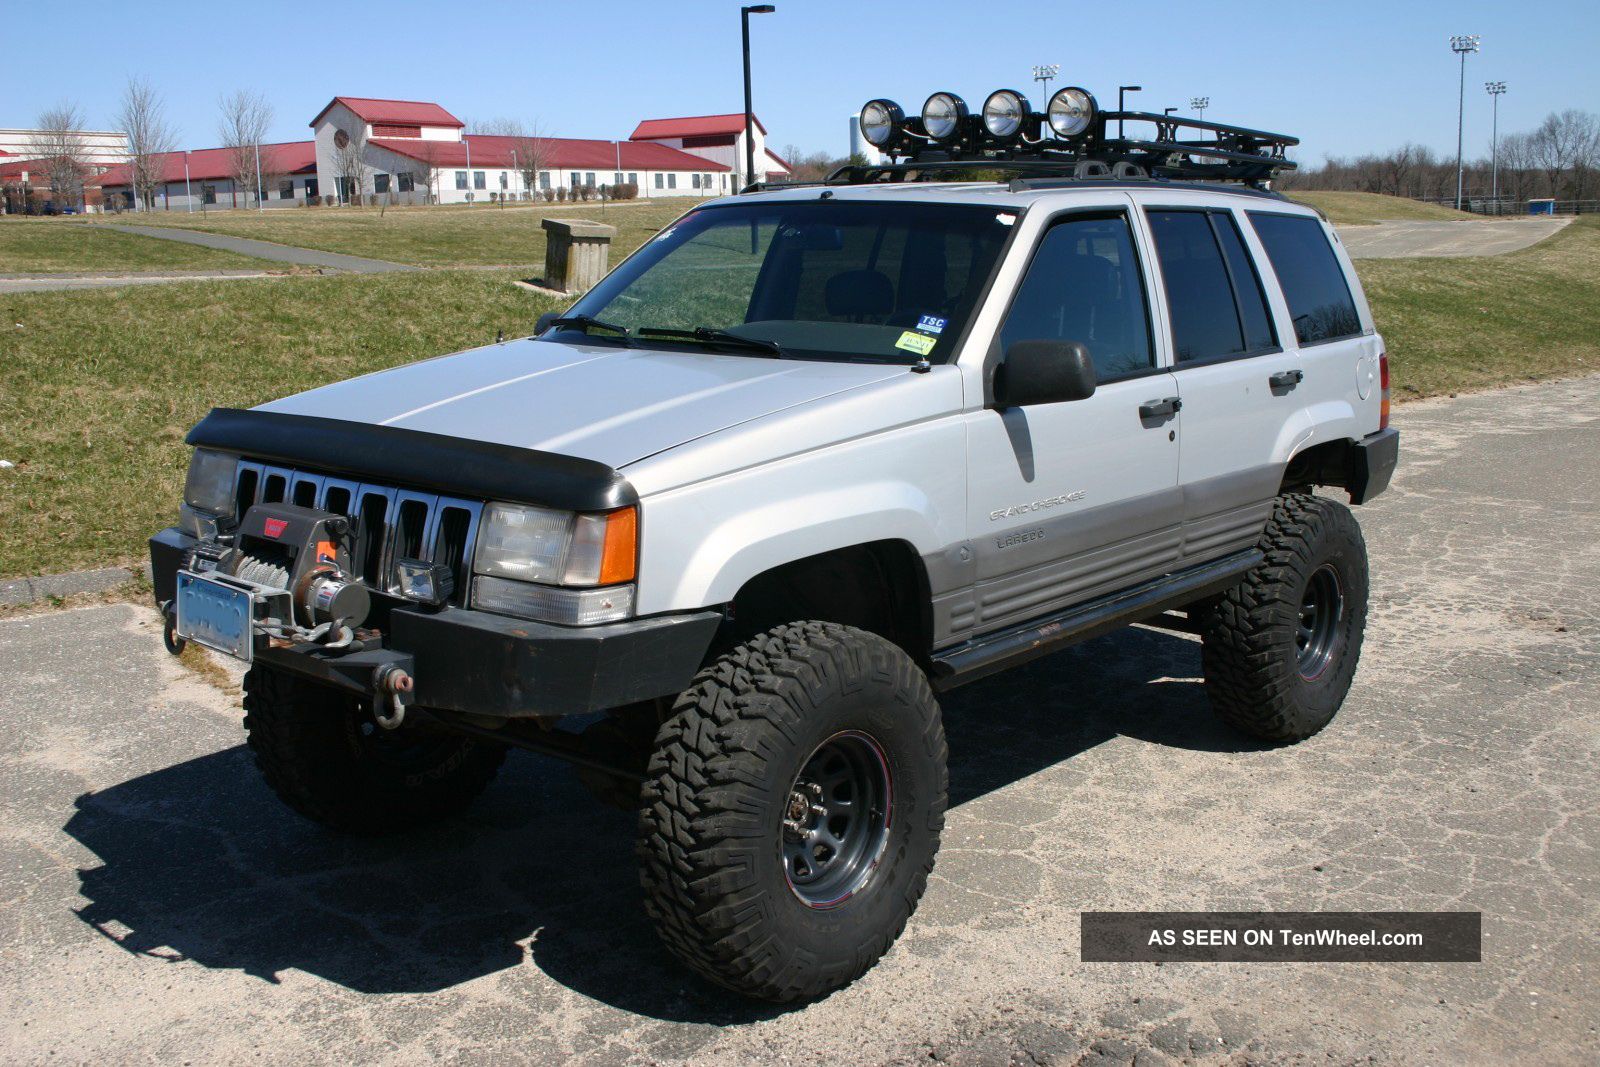 1996 Jeep grand cherokee off road tires #3